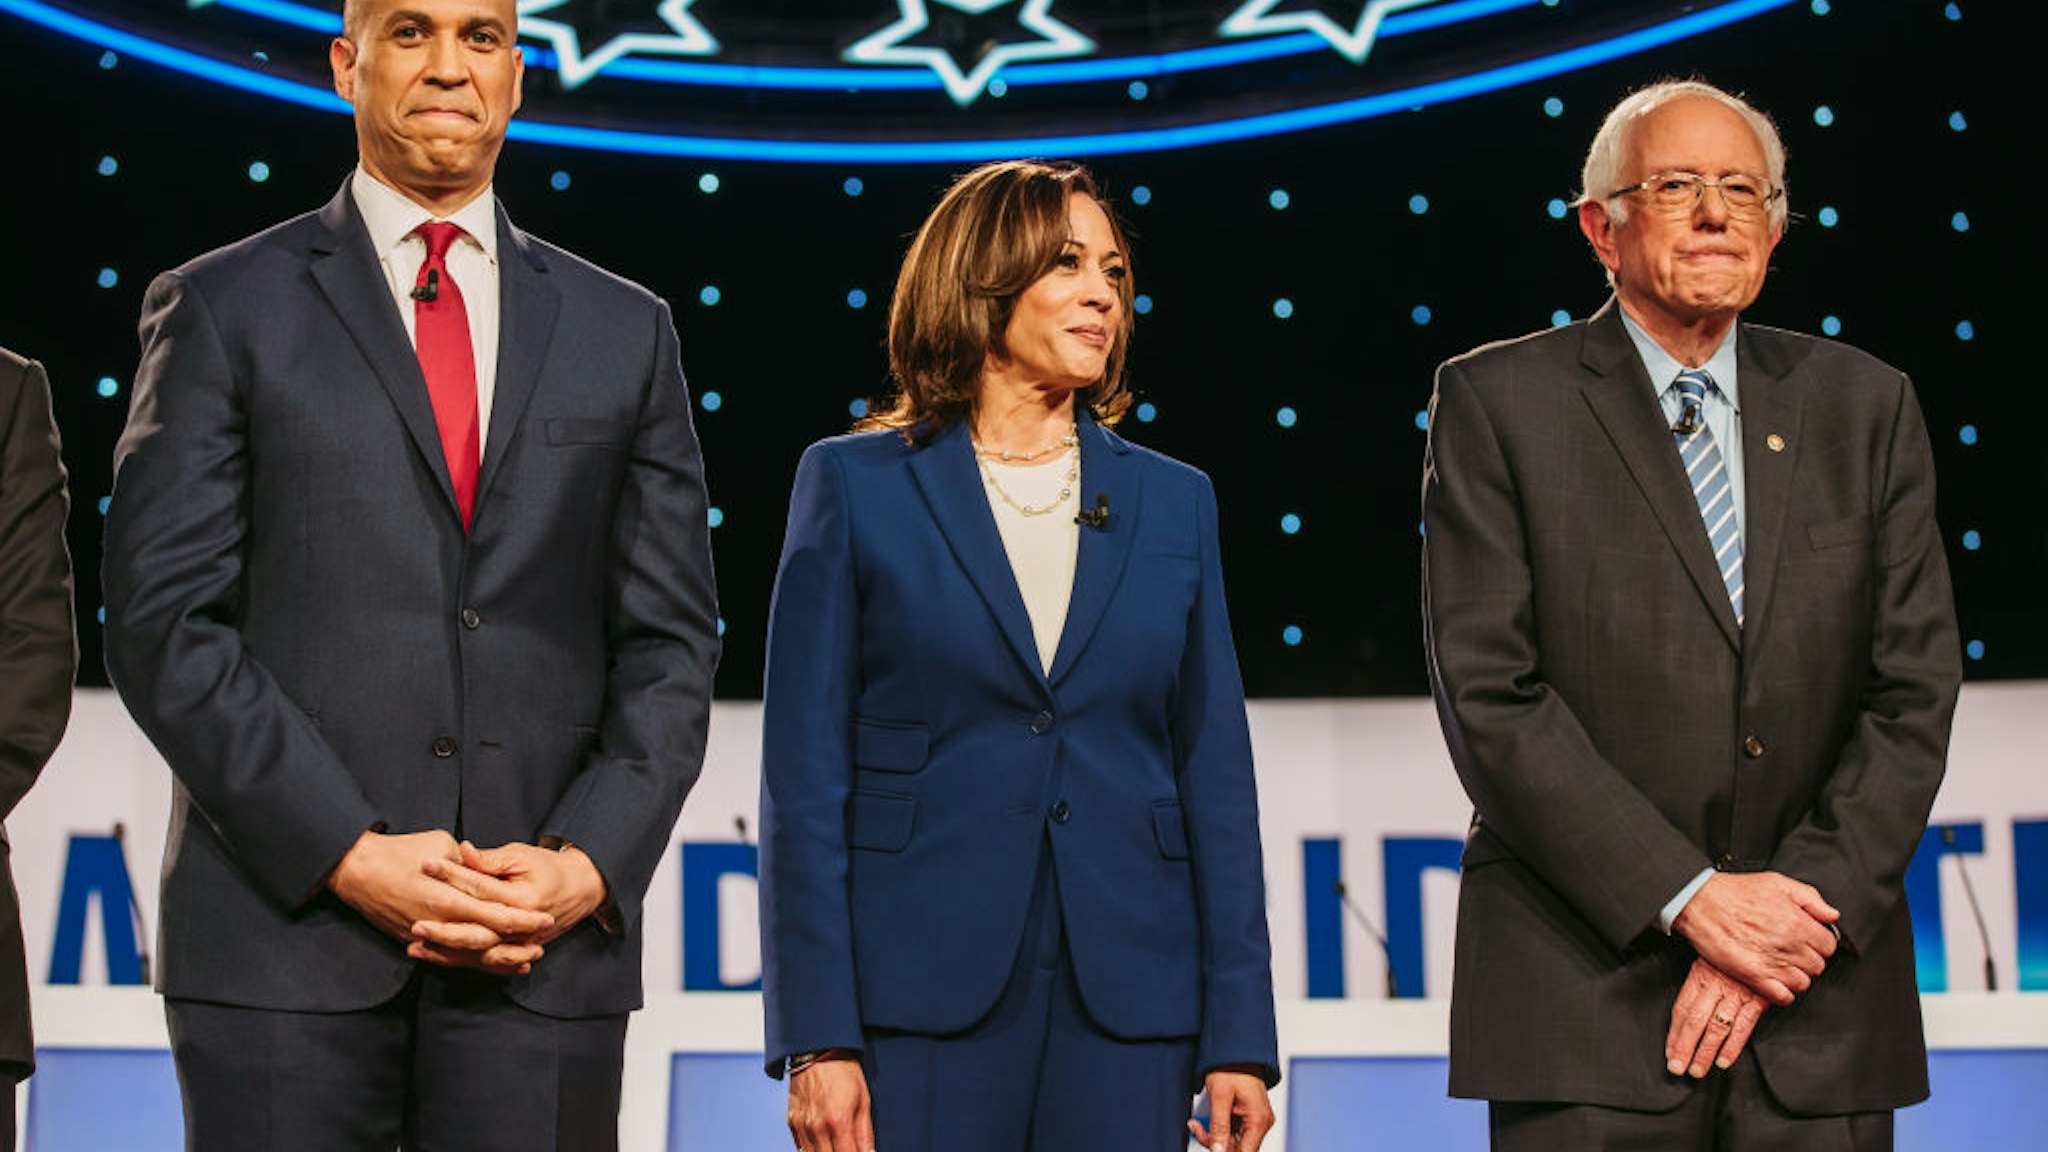 2020 Democratic presidential candidates Senator Cory Booker, a Democrat from New Jersey, from left, Senator Kamala Harris, a Democrat from California, and Senator Bernie Sanders, an independent from Vermont, arrive on stage for the Democratic presidential candidate debate in Westerville, Ohio, U.S., on Tuesday, Oct. 15, 2019.